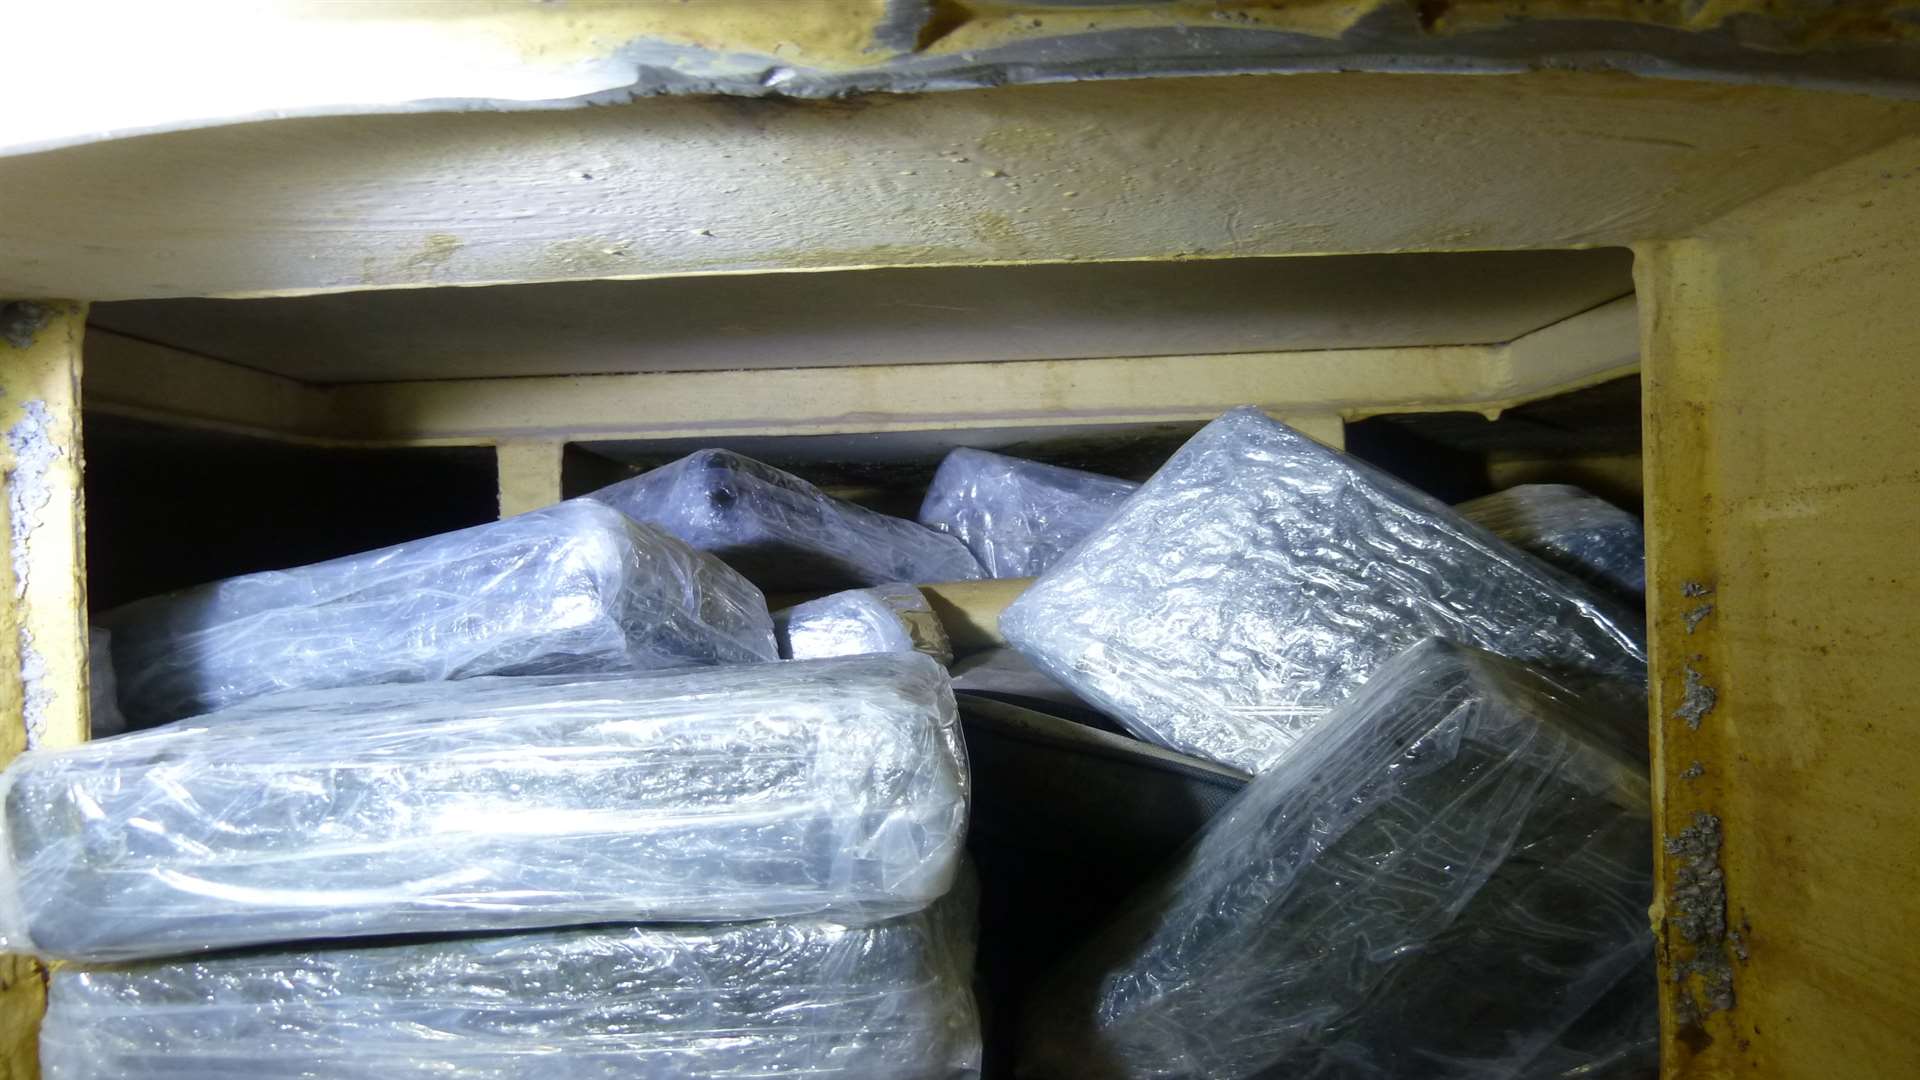 The drugs have an estimated potential street value in excess of £56 million.